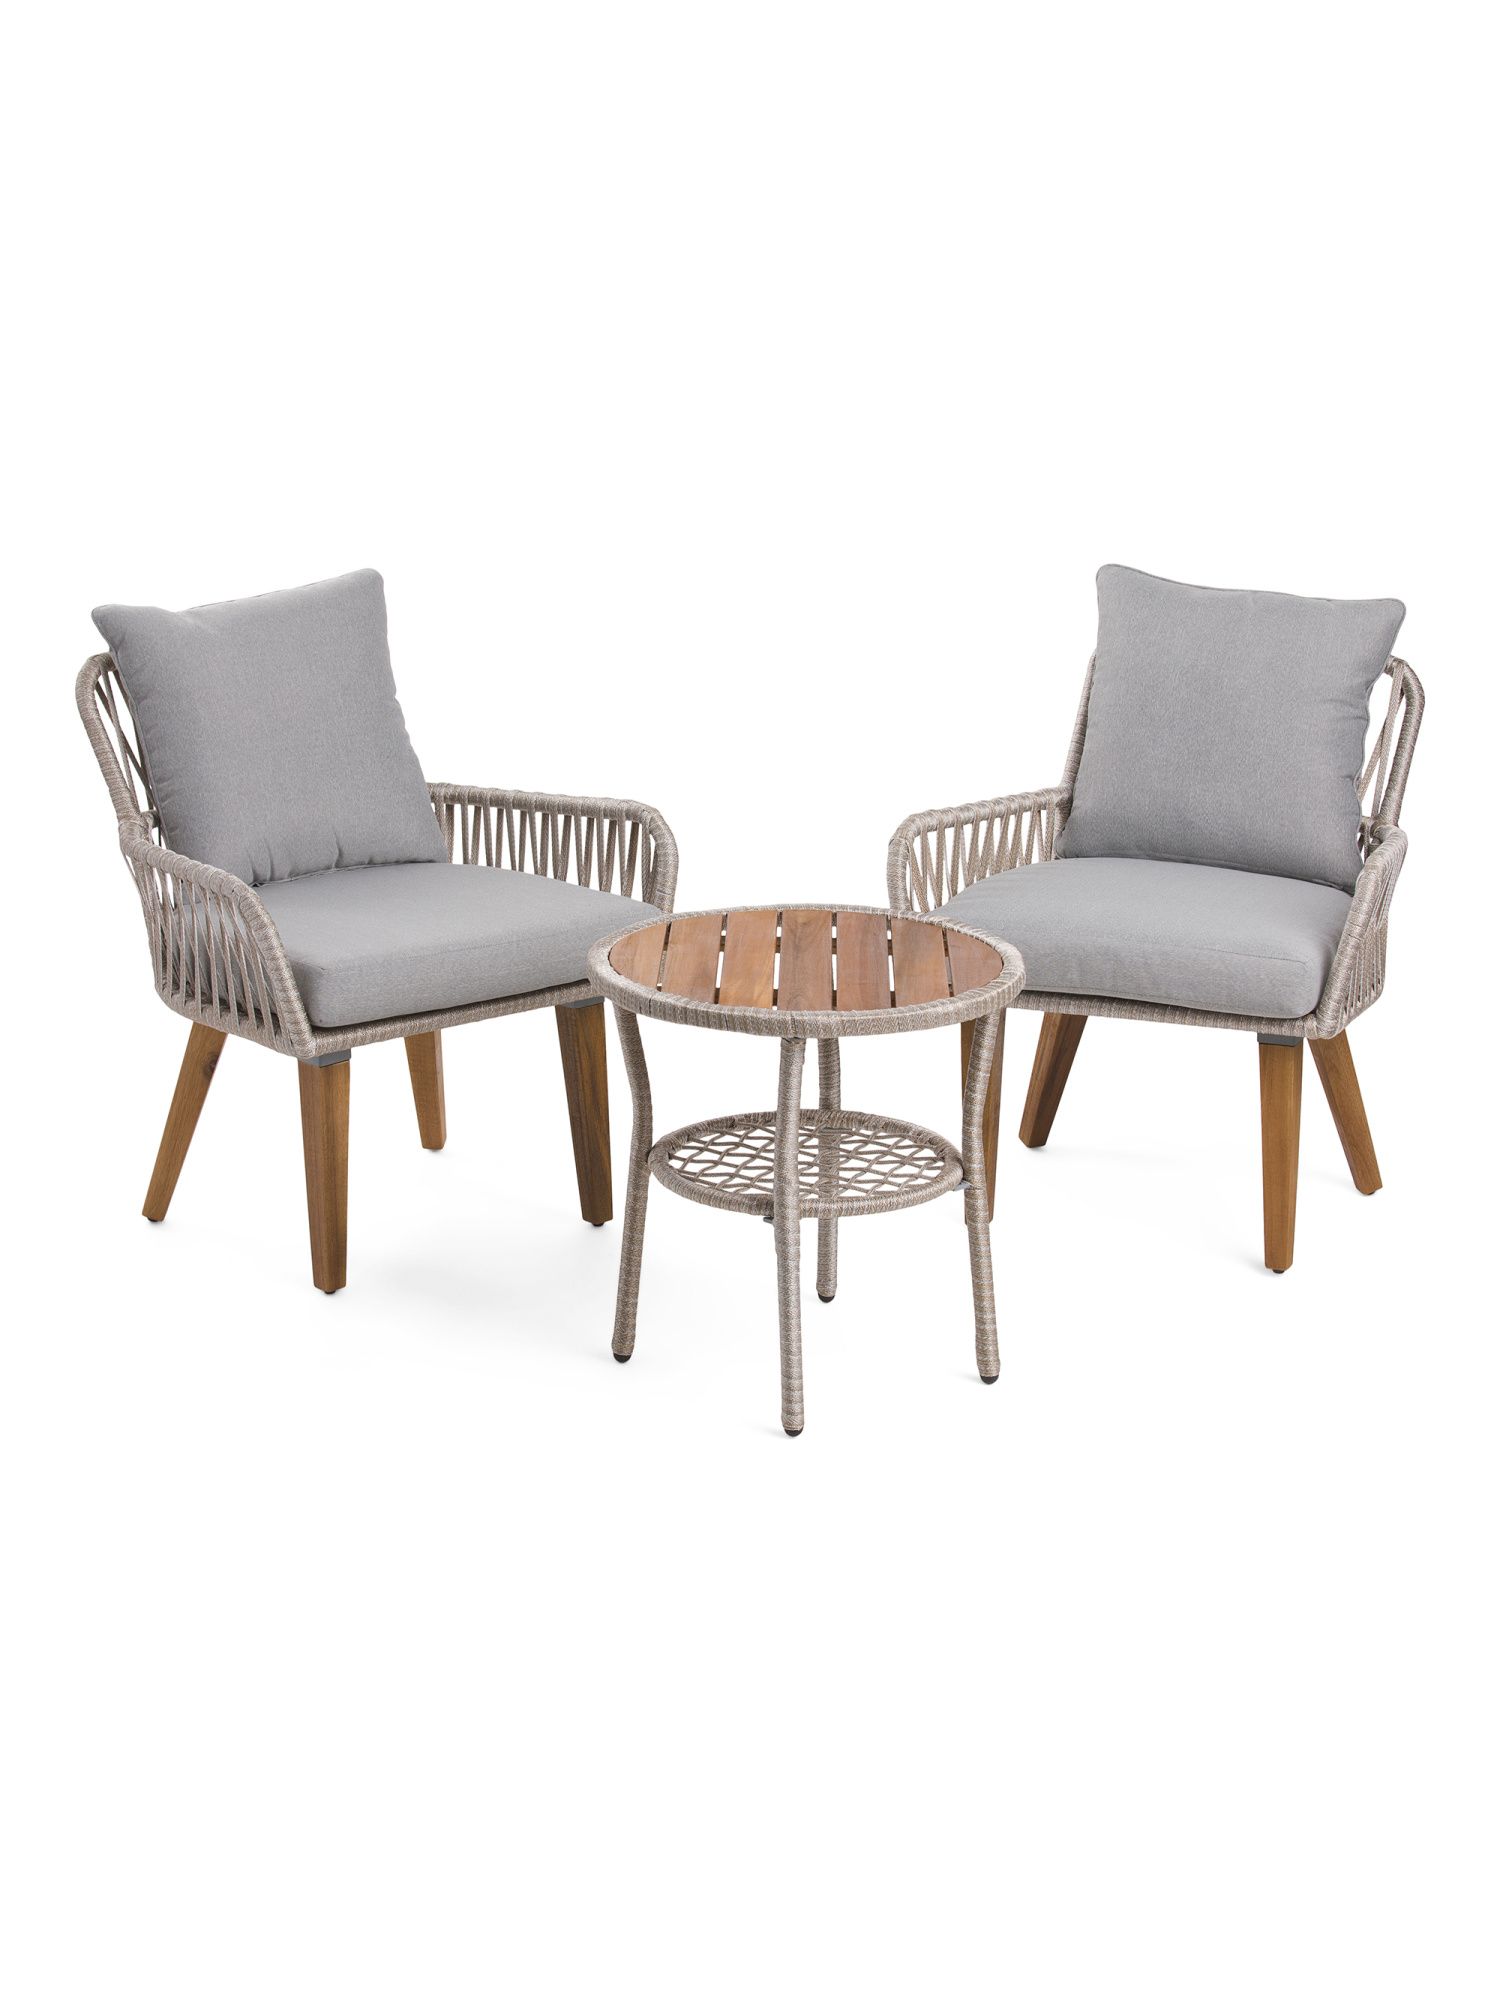 Outdoor Rope Chairs And Table Set | TJ Maxx